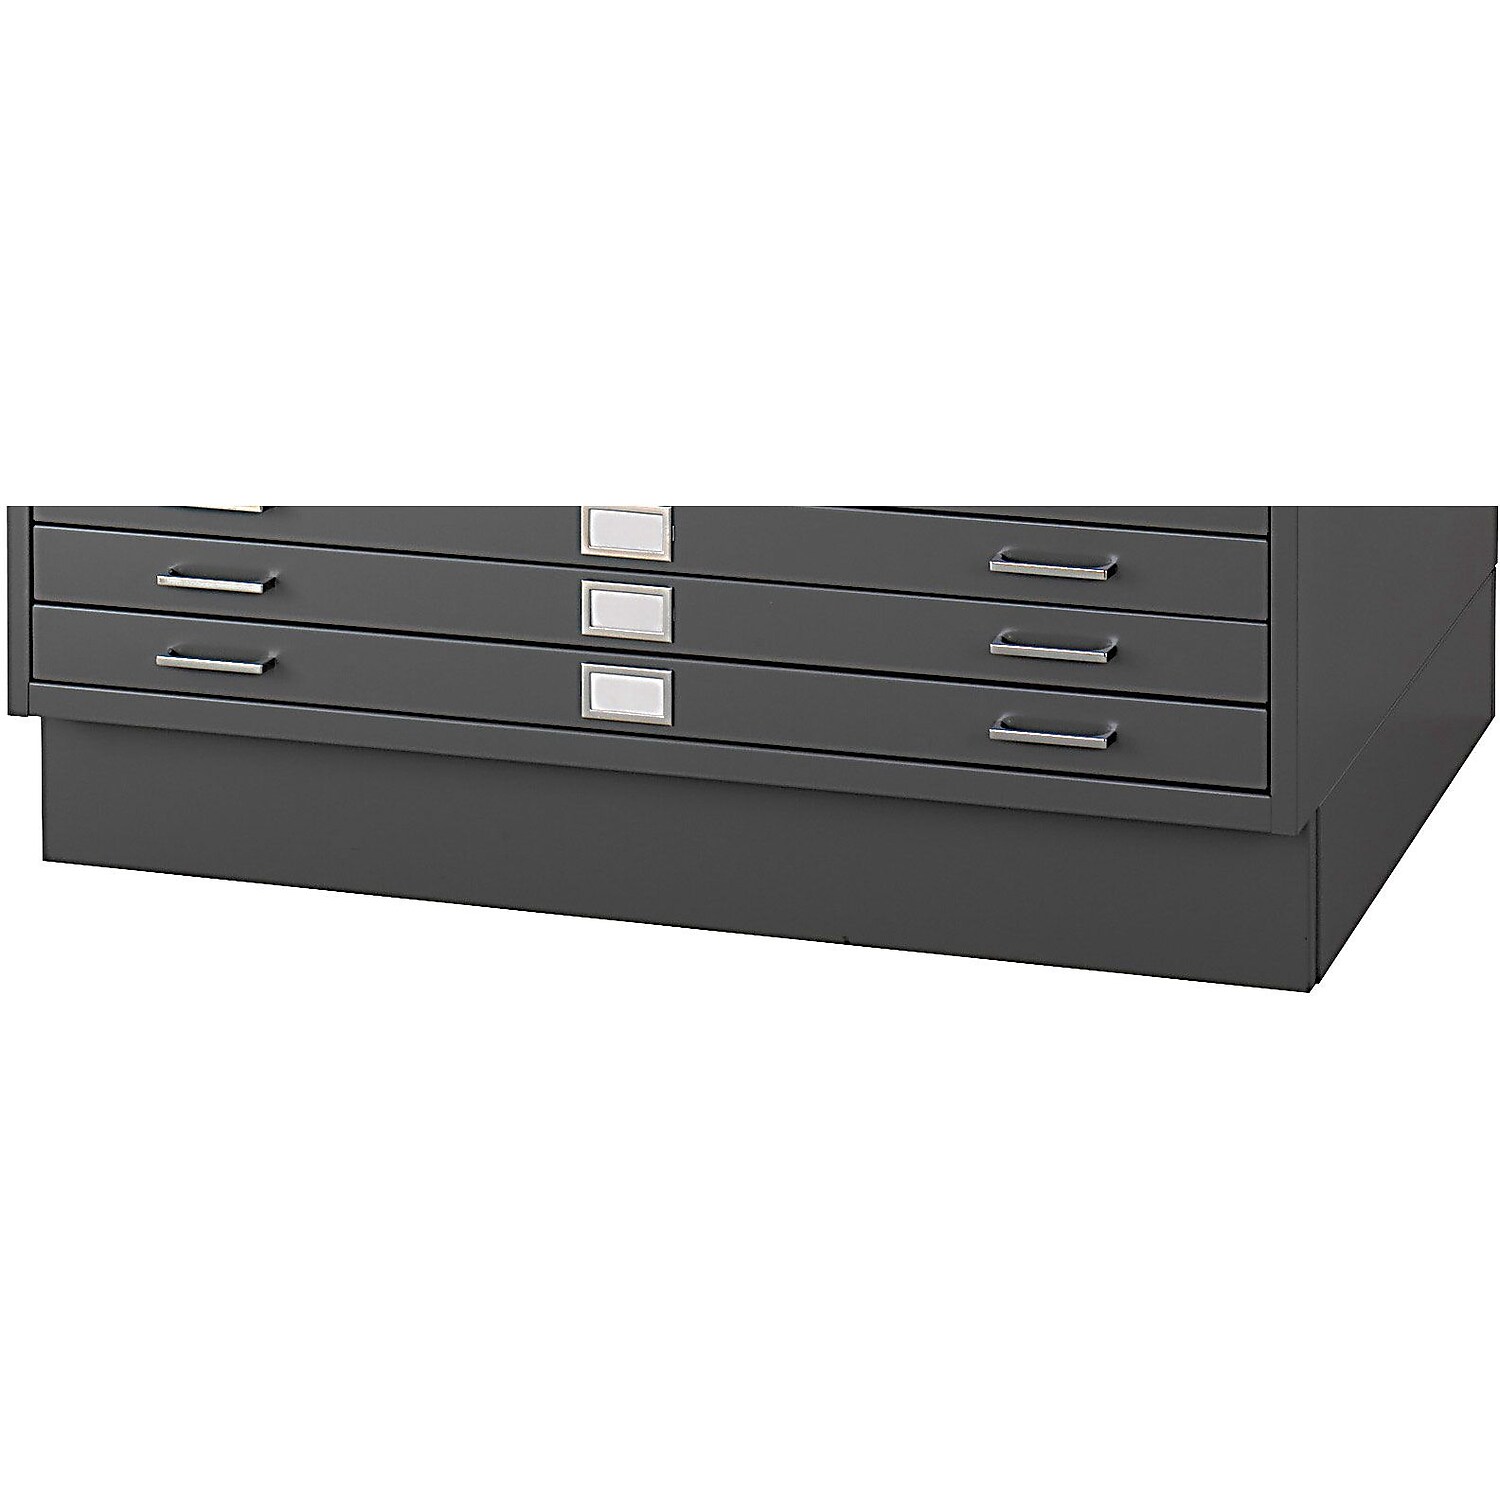 Safco Flat File Closed Base for 4996 and 4986 Steel Black